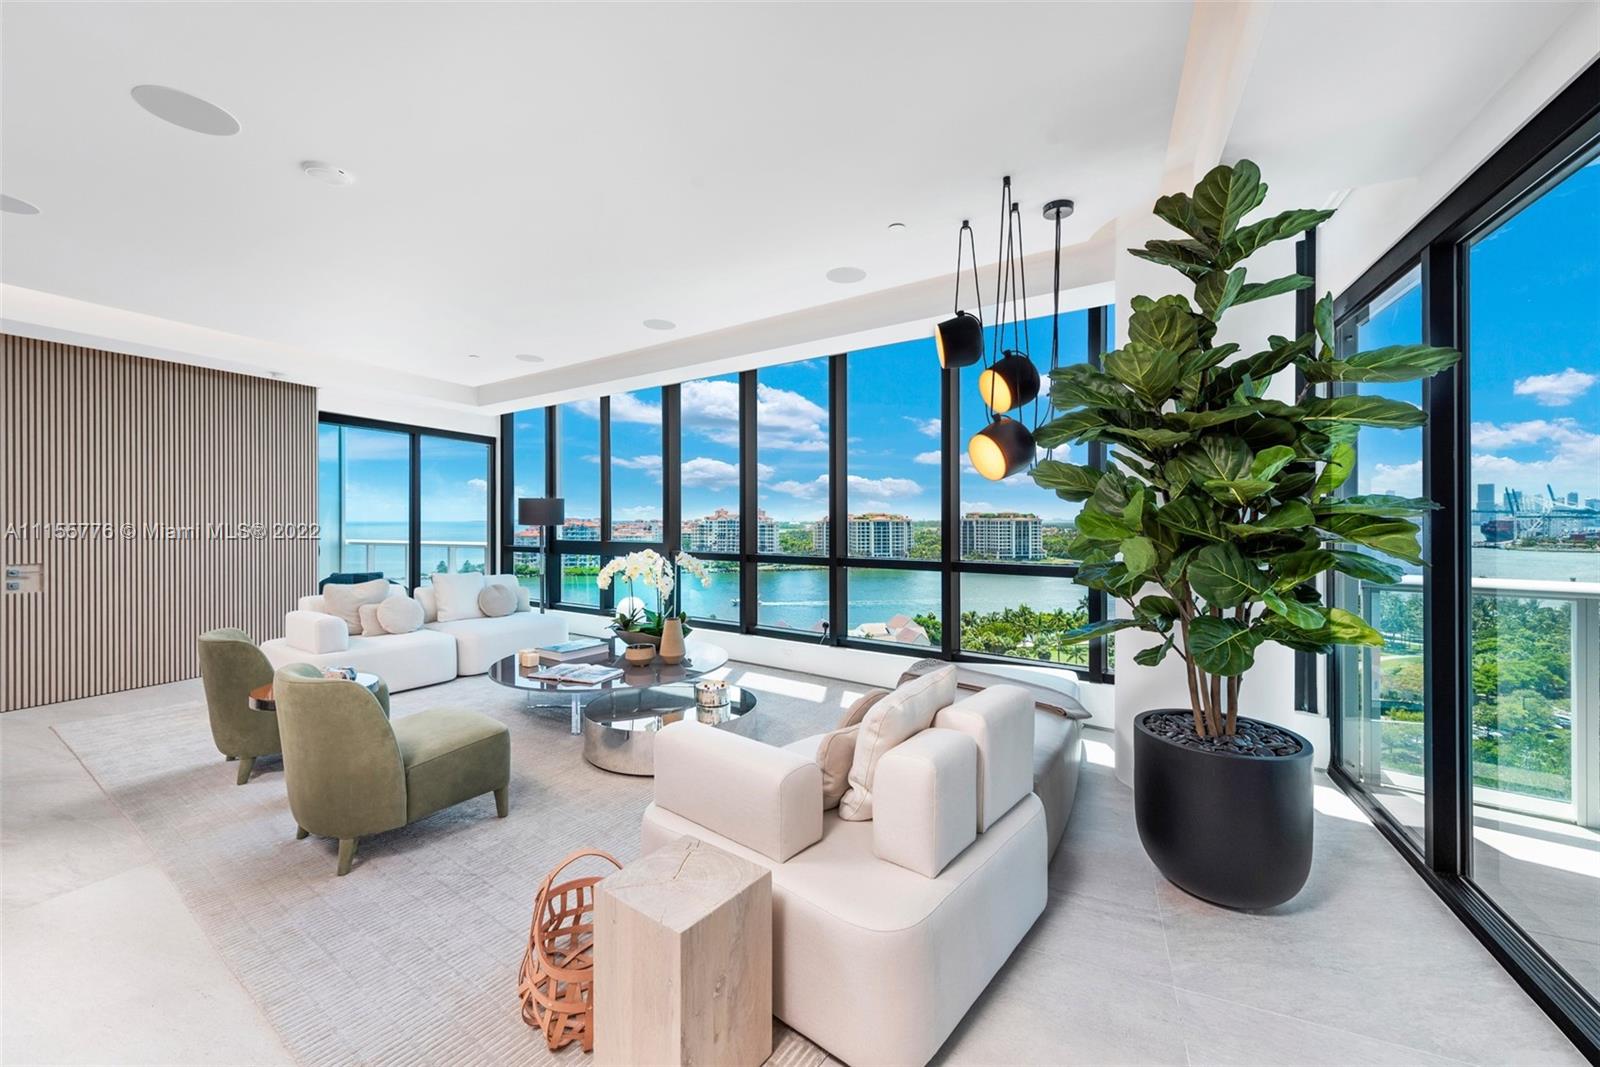 Every single detail in this one-of-a-kind  3,000 SF custom built, combined SW corner residence is meticulously designed blending wonderful vistas with the finest interior appointments. Impressive 32' wide living room perched above the Atlantic, Biscayne Bay and South Pointe Park, offers a full panorama from the ocean to Miami's Skyline sunsets. Custom features include Ornare kitchen +WI closets, Flos Architectural Lighting, Dornbracht/Hansgrohe baths , book-matched CalcattaGold, white oak lower wall, Lutron/Control4 technology. Grand primary suite features its own terrace, louver crowned California king bed, sitting-room+spa. Discover an unparalleled lifestyle Continuum offers its residents on an unprecedented 12.5 acre beachfront oasis at the southernmost tip of the Island.Turnkey luxury.